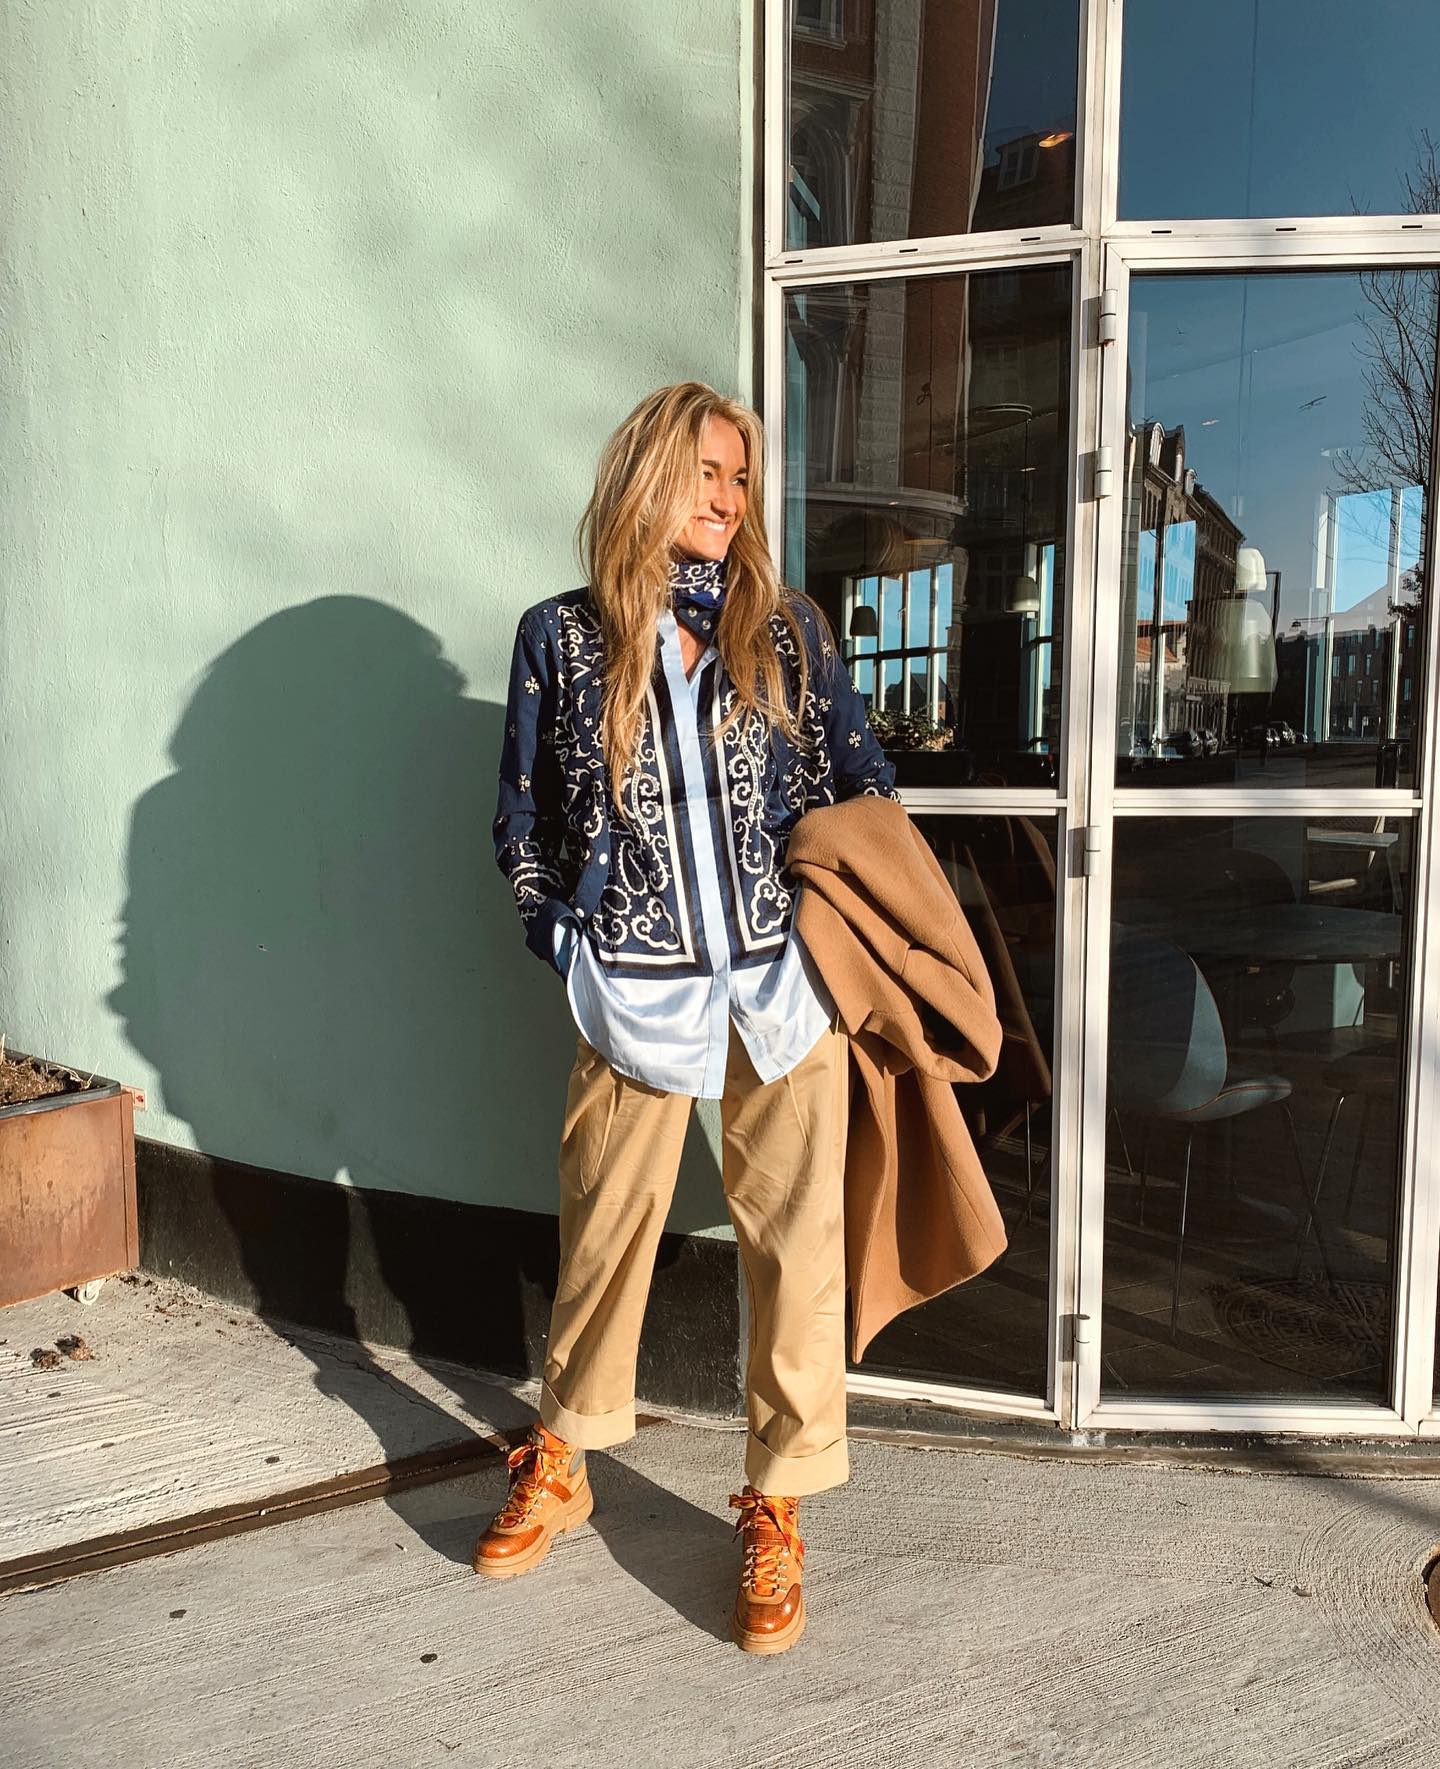 Josephine Havmøller giving us good weekend-wear inspo in relaxed chinos and a dash of bandana cool.